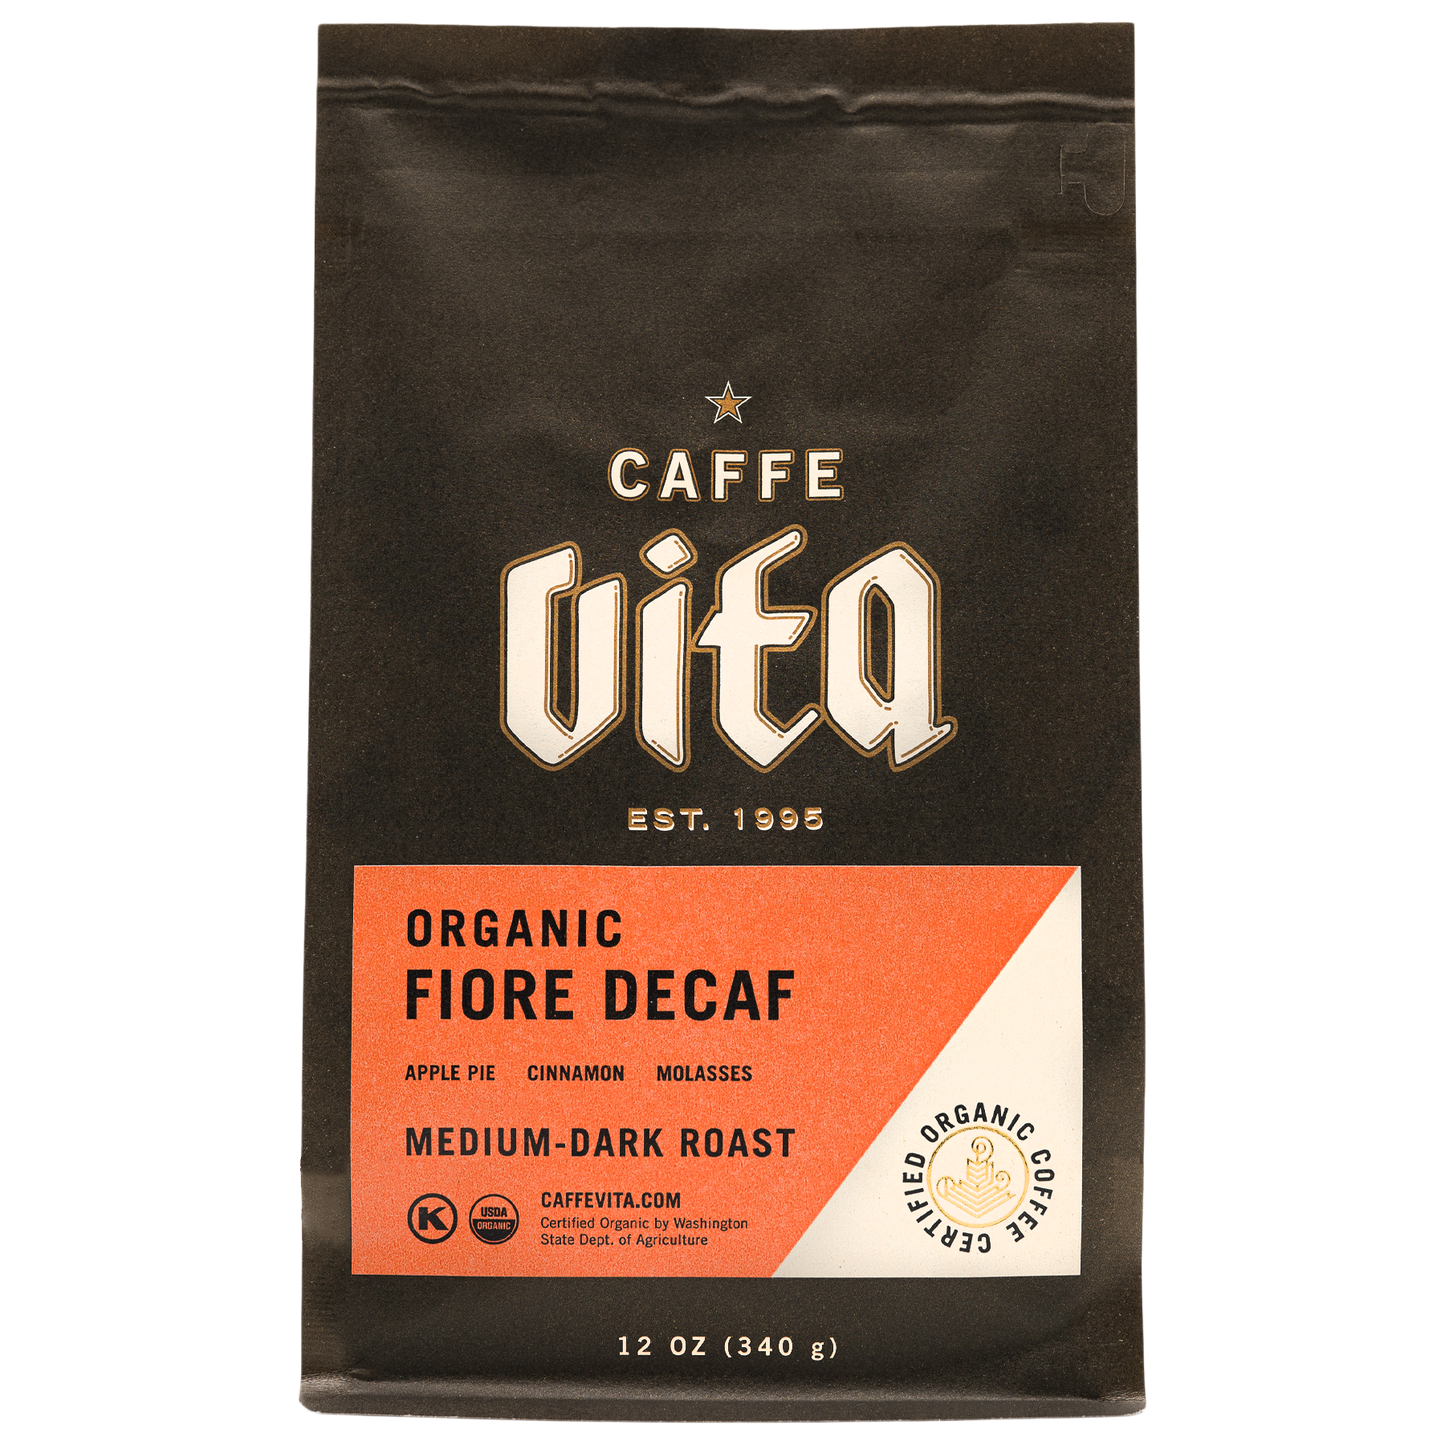 Front, 12oz Organic Fiore Decaf bag with orange label.